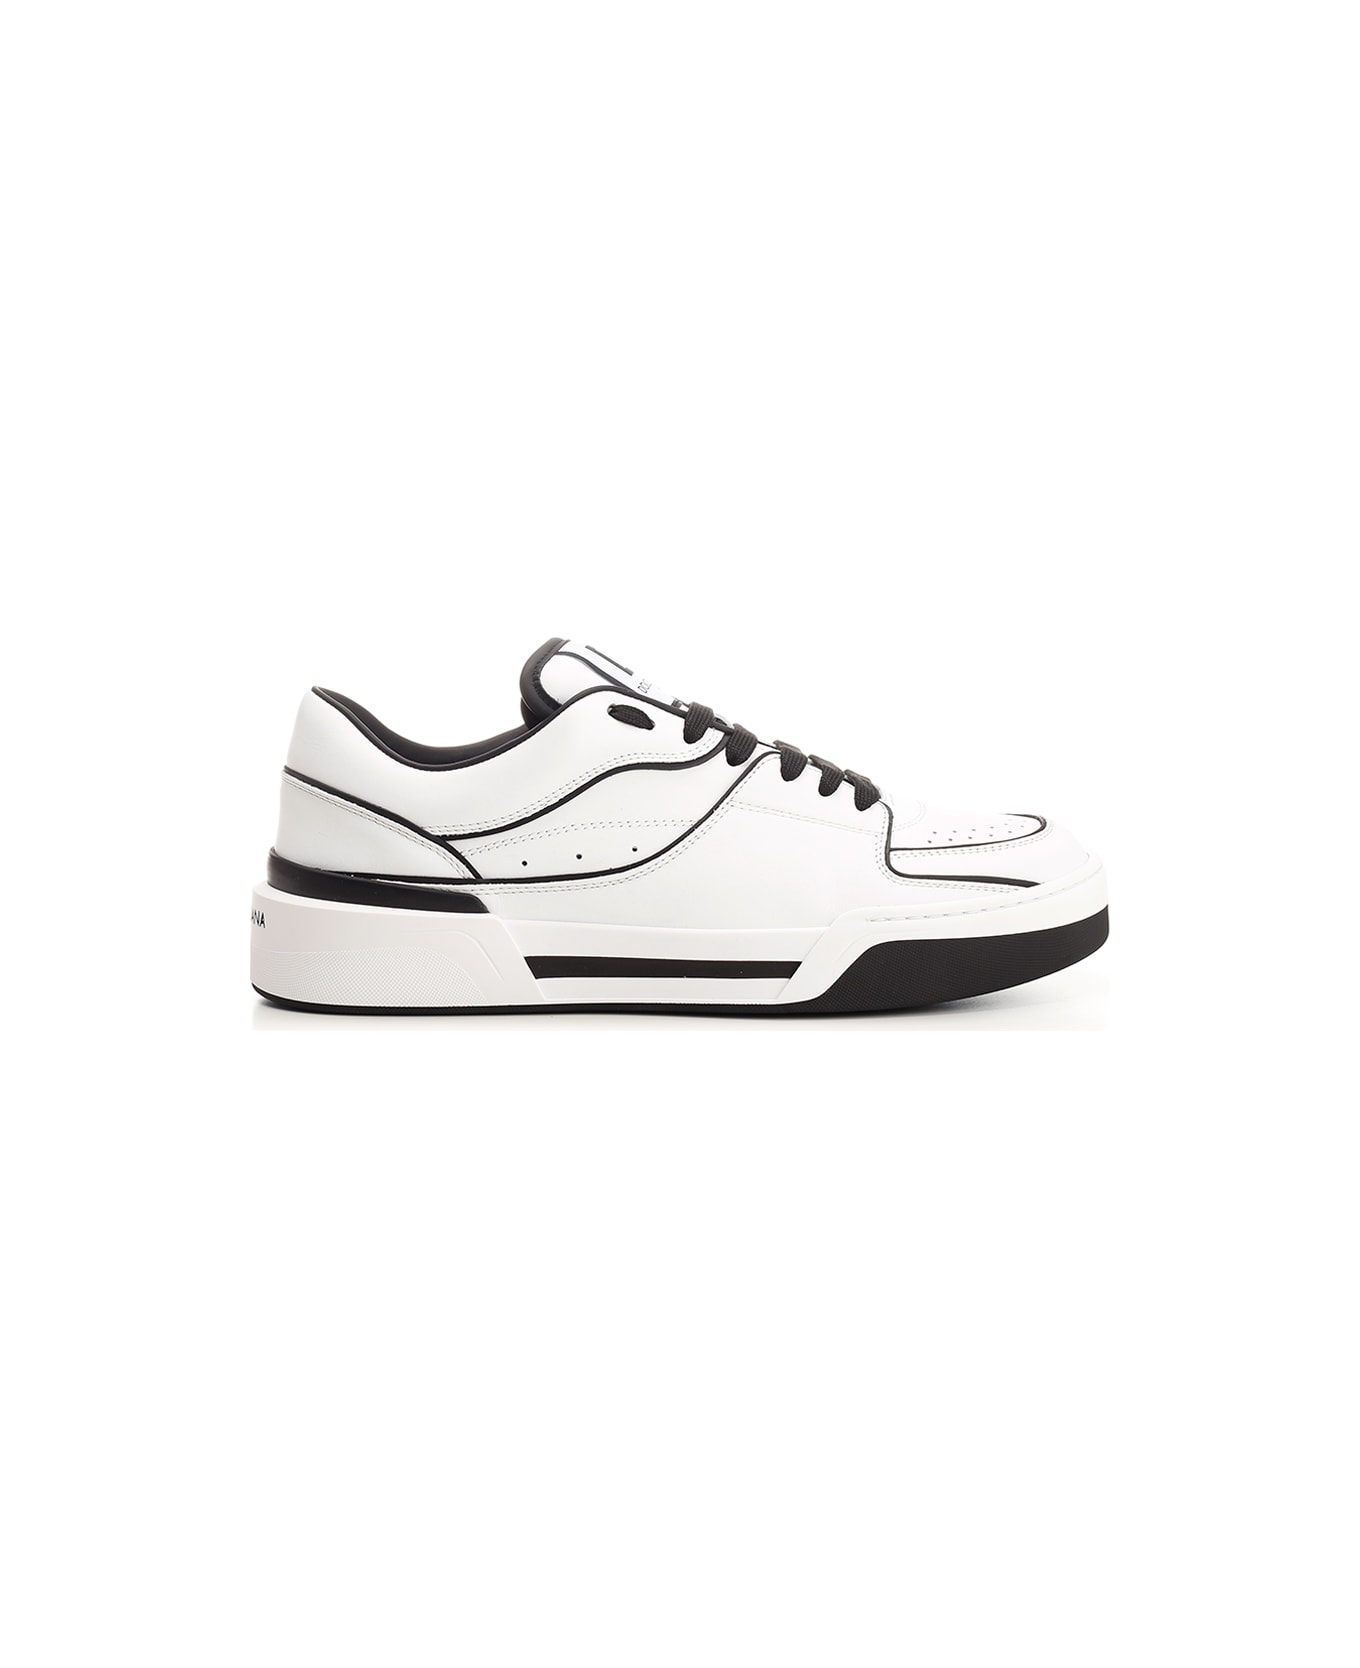 Our Top Picks for Best Stability neutro shoes for Running 'new Roma' Sneaker - Bianco Nero